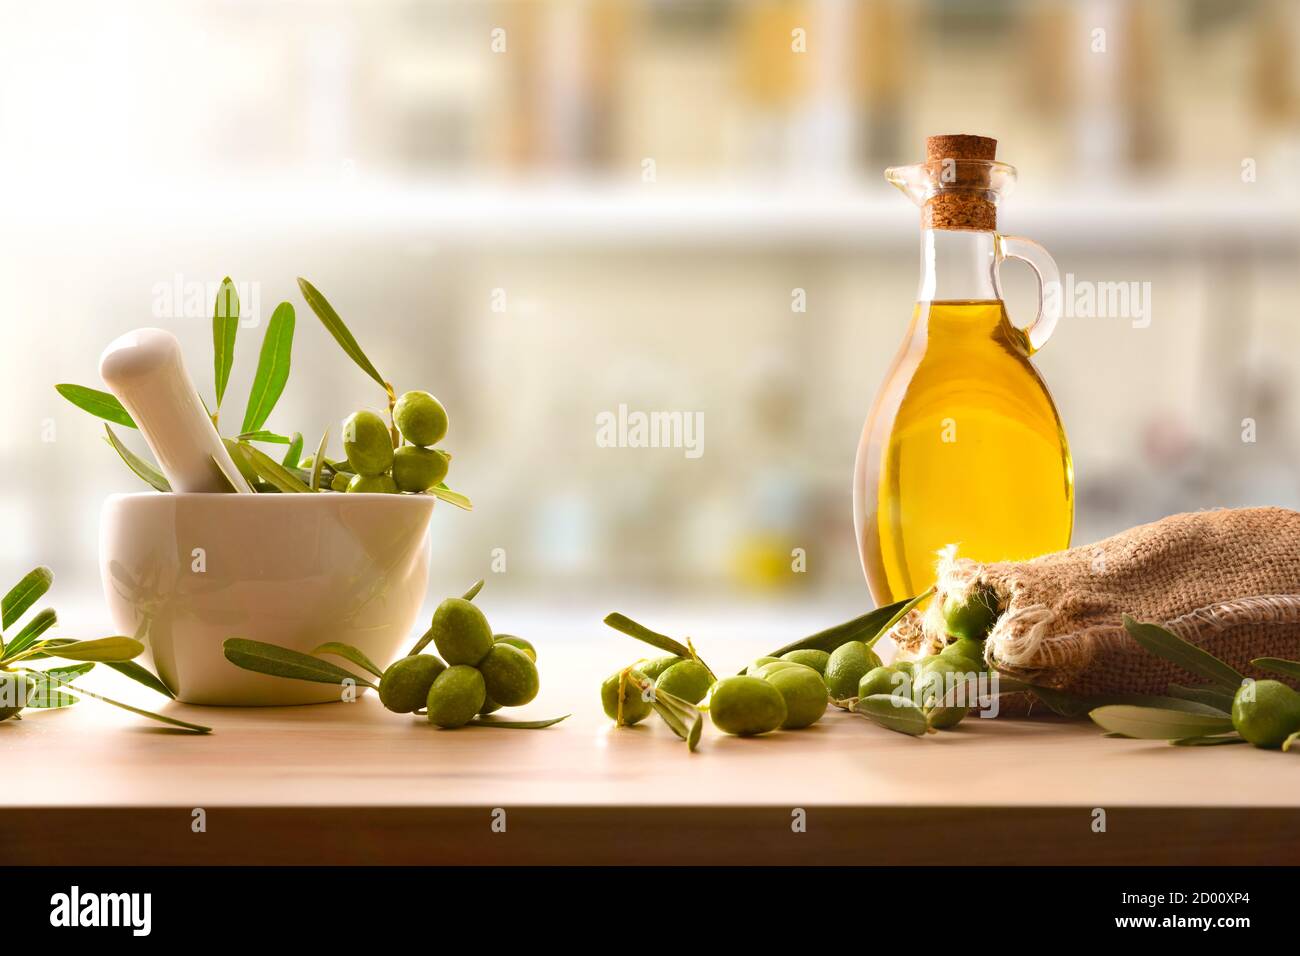 Preparation of olive oil seed in ceramic glass for body and culinary care  on table with mortar and sack of olives. Front view Stock Photo - Alamy